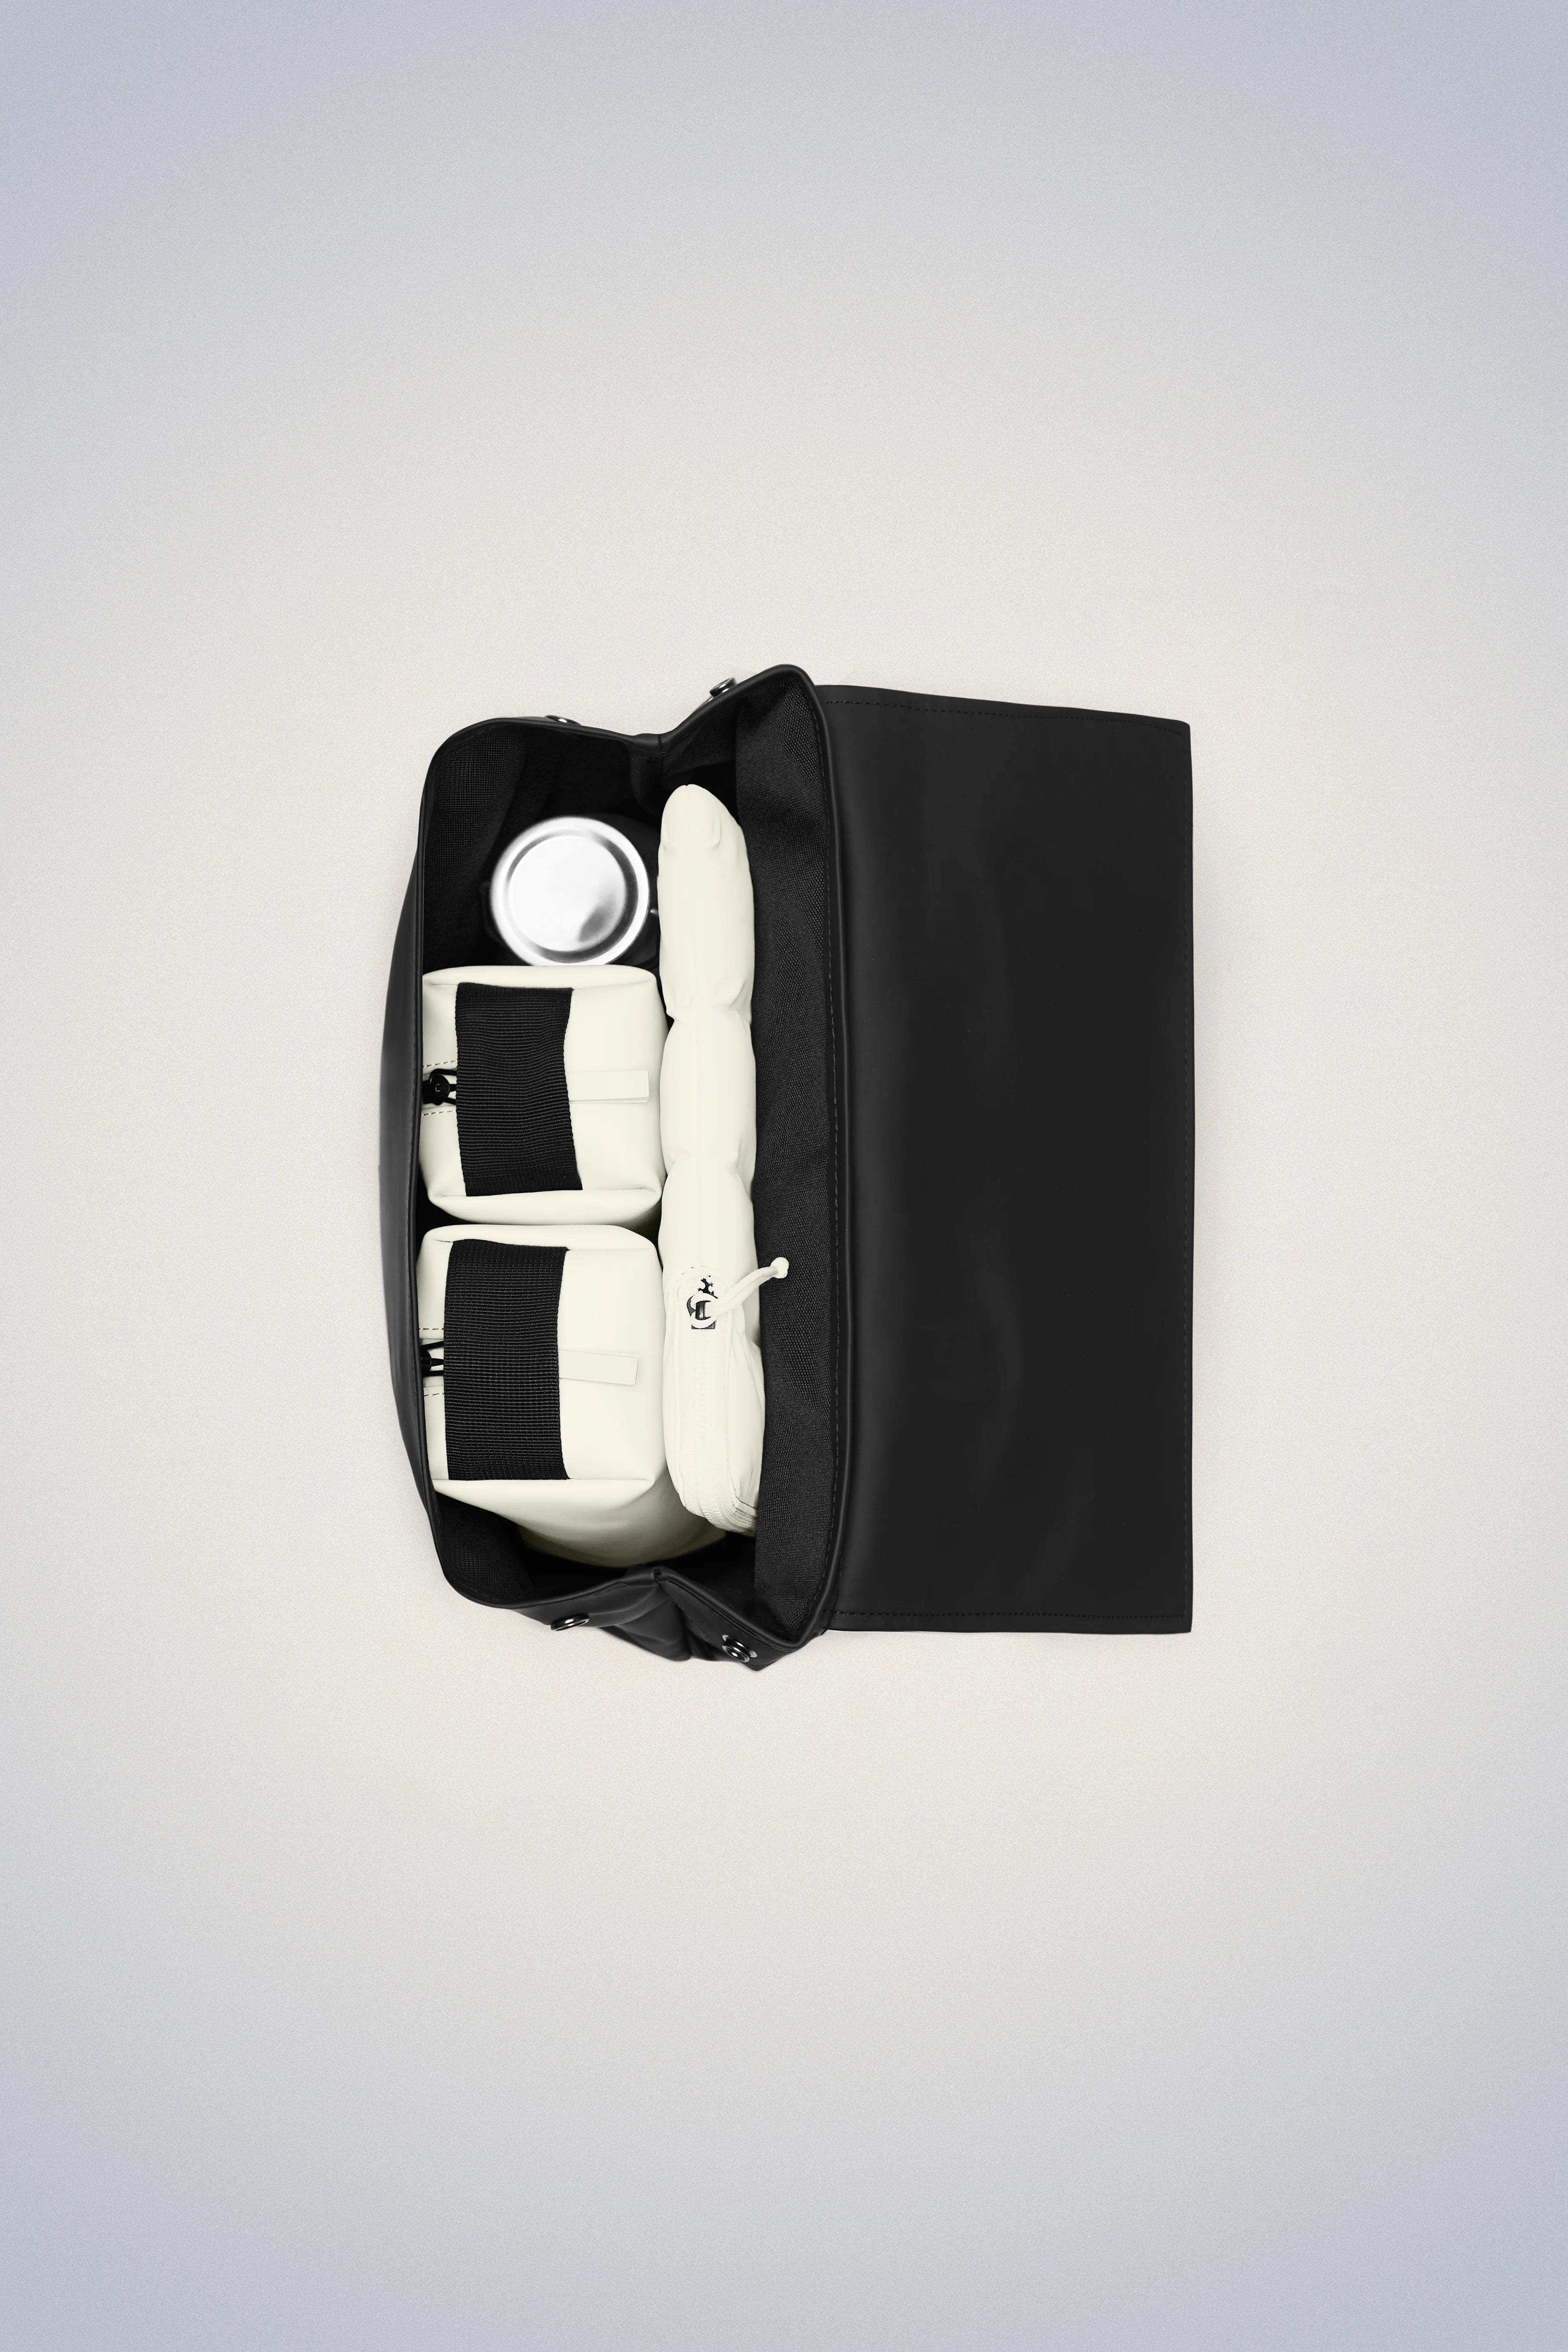 A classic school backpack, the Rains MSN Bag Mini, in black and white with a few conte items inside.